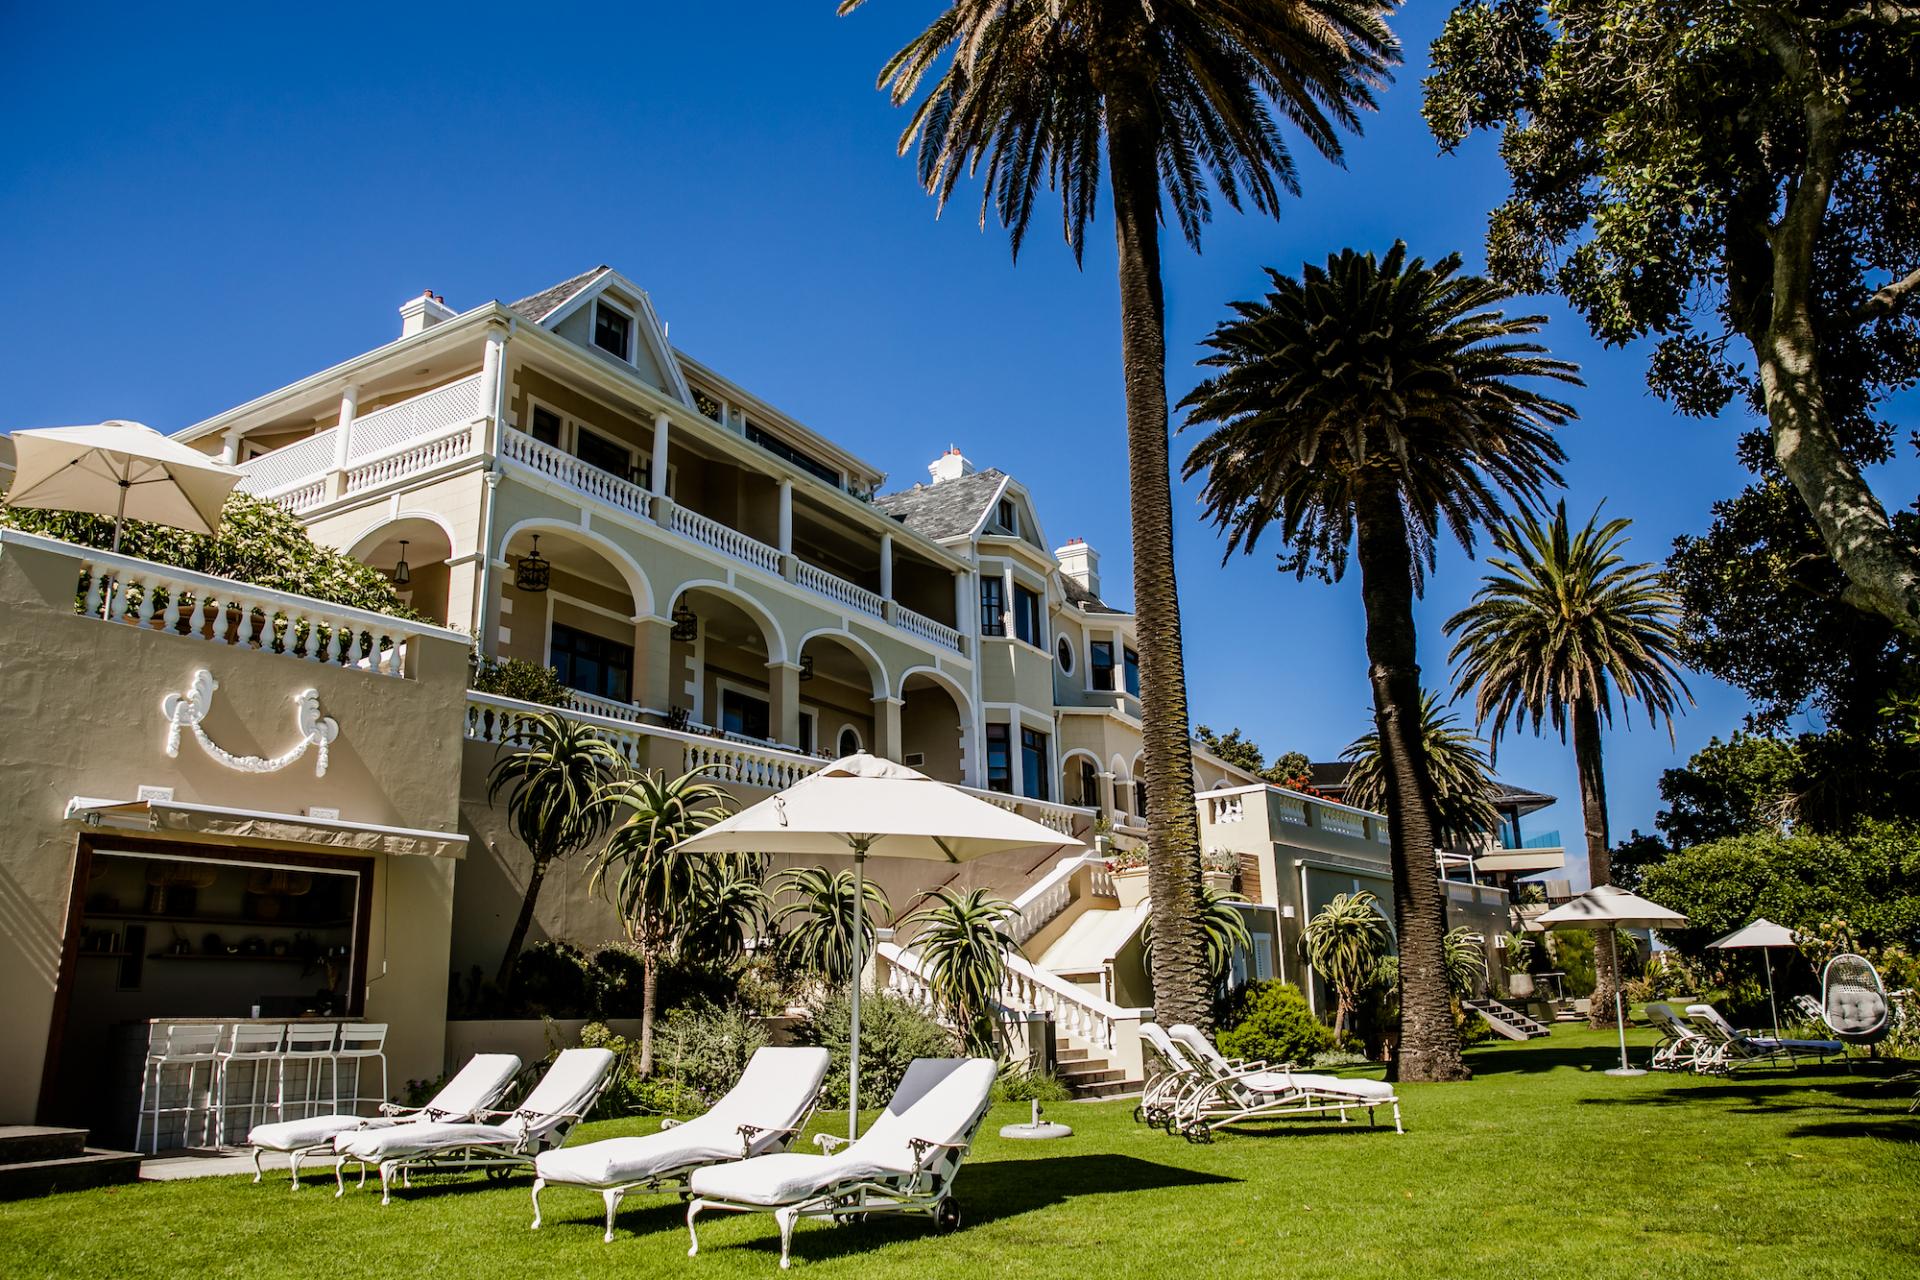 Feel the Fresh Ocean Air at this Bantry Bay Escape with Wide-open Views